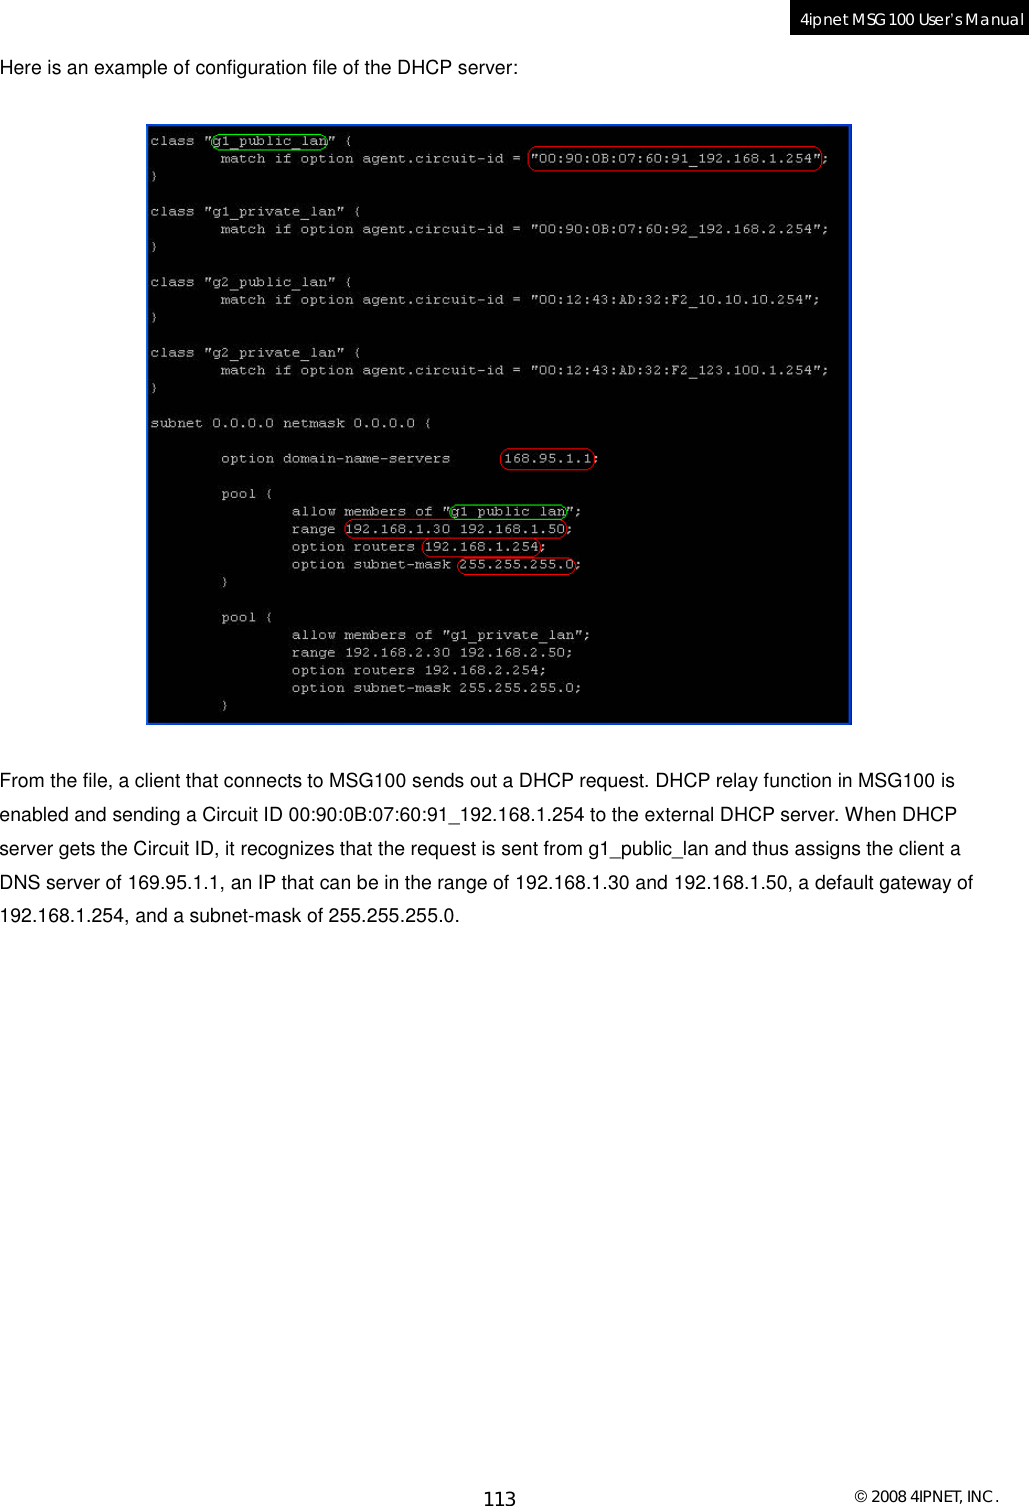  © 2008 4IPNET, INC. 113 4ipnet MSG100 User’s Manual  Here is an example of configuration file of the DHCP server:     From the file, a client that connects to MSG100 sends out a DHCP request. DHCP relay function in MSG100 is enabled and sending a Circuit ID 00:90:0B:07:60:91_192.168.1.254 to the external DHCP server. When DHCP server gets the Circuit ID, it recognizes that the request is sent from g1_public_lan and thus assigns the client a DNS server of 169.95.1.1, an IP that can be in the range of 192.168.1.30 and 192.168.1.50, a default gateway of 192.168.1.254, and a subnet-mask of 255.255.255.0.          